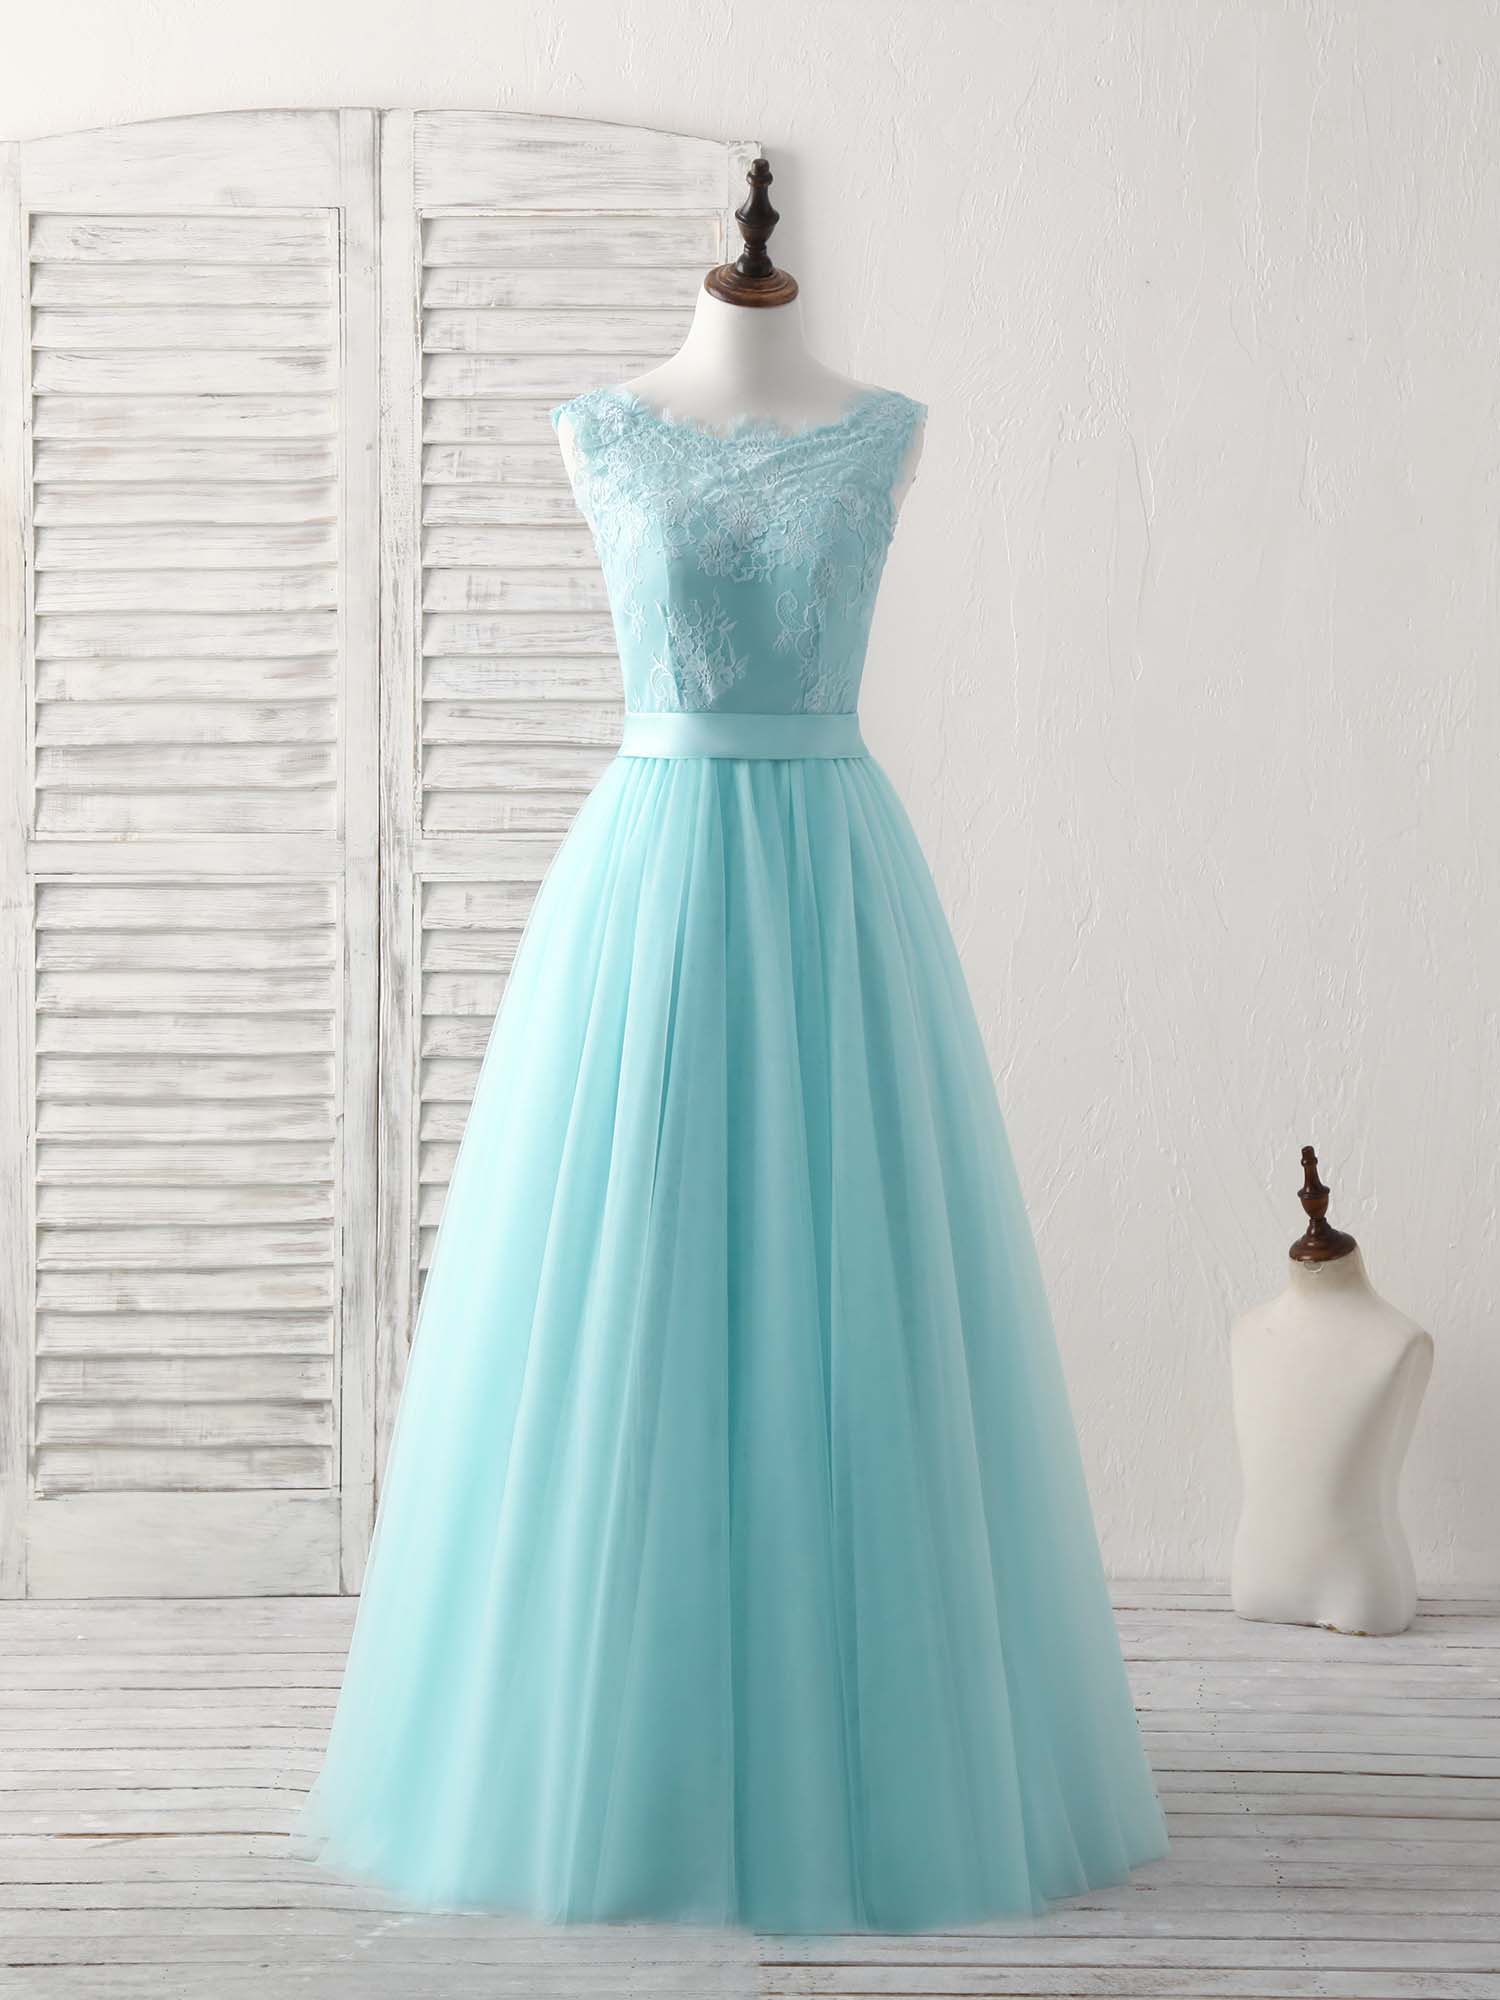 Party Dress Vintage, Green Round Neck Lace Tulle Long Prom Dress, Evening Dress